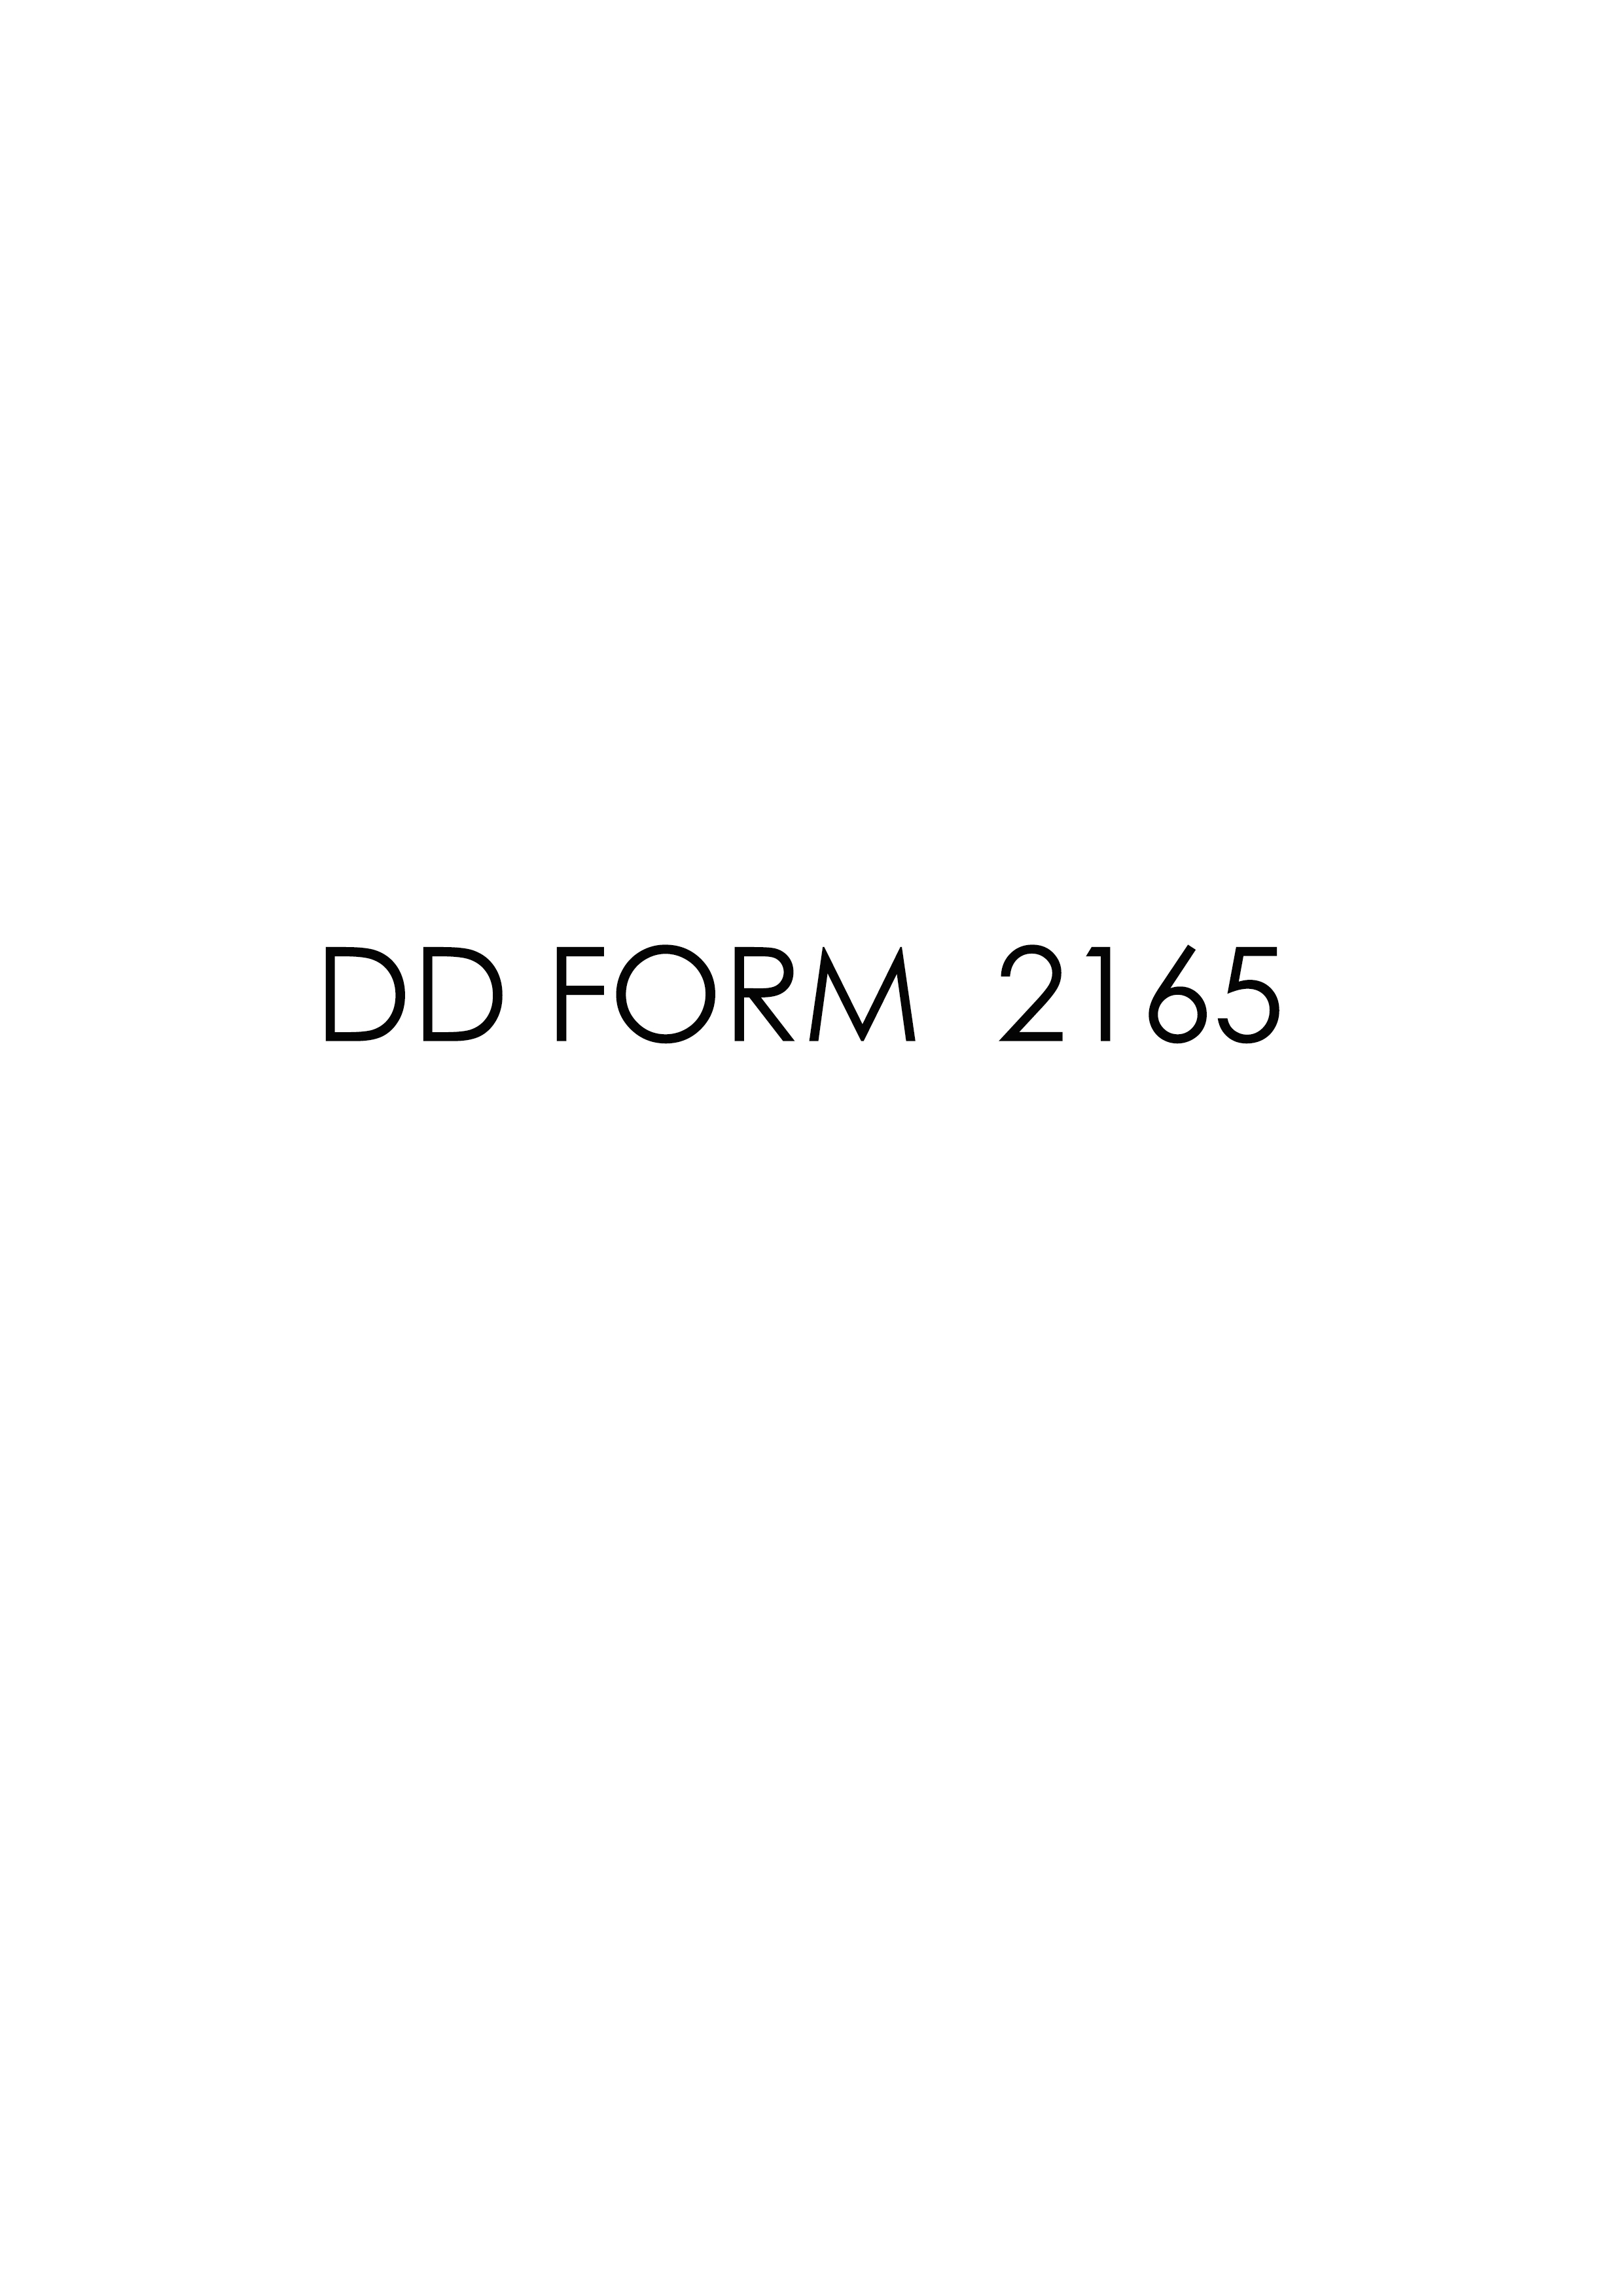 Download Fillable dd Form 2165